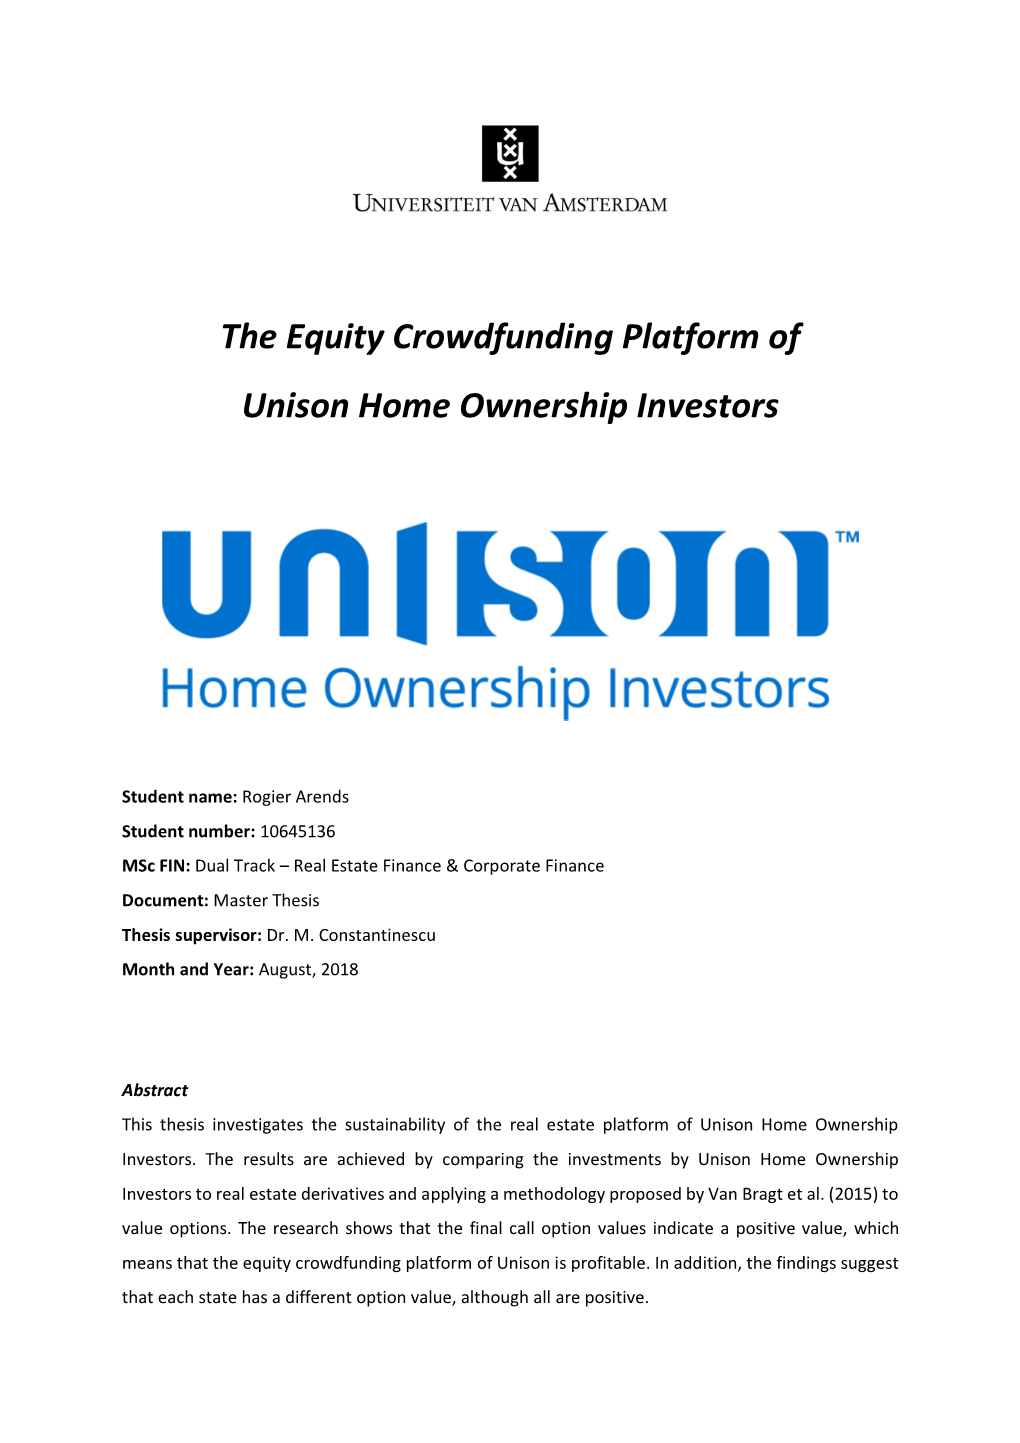 The Equity Crowdfunding Platform of Unison Home Ownership Investors